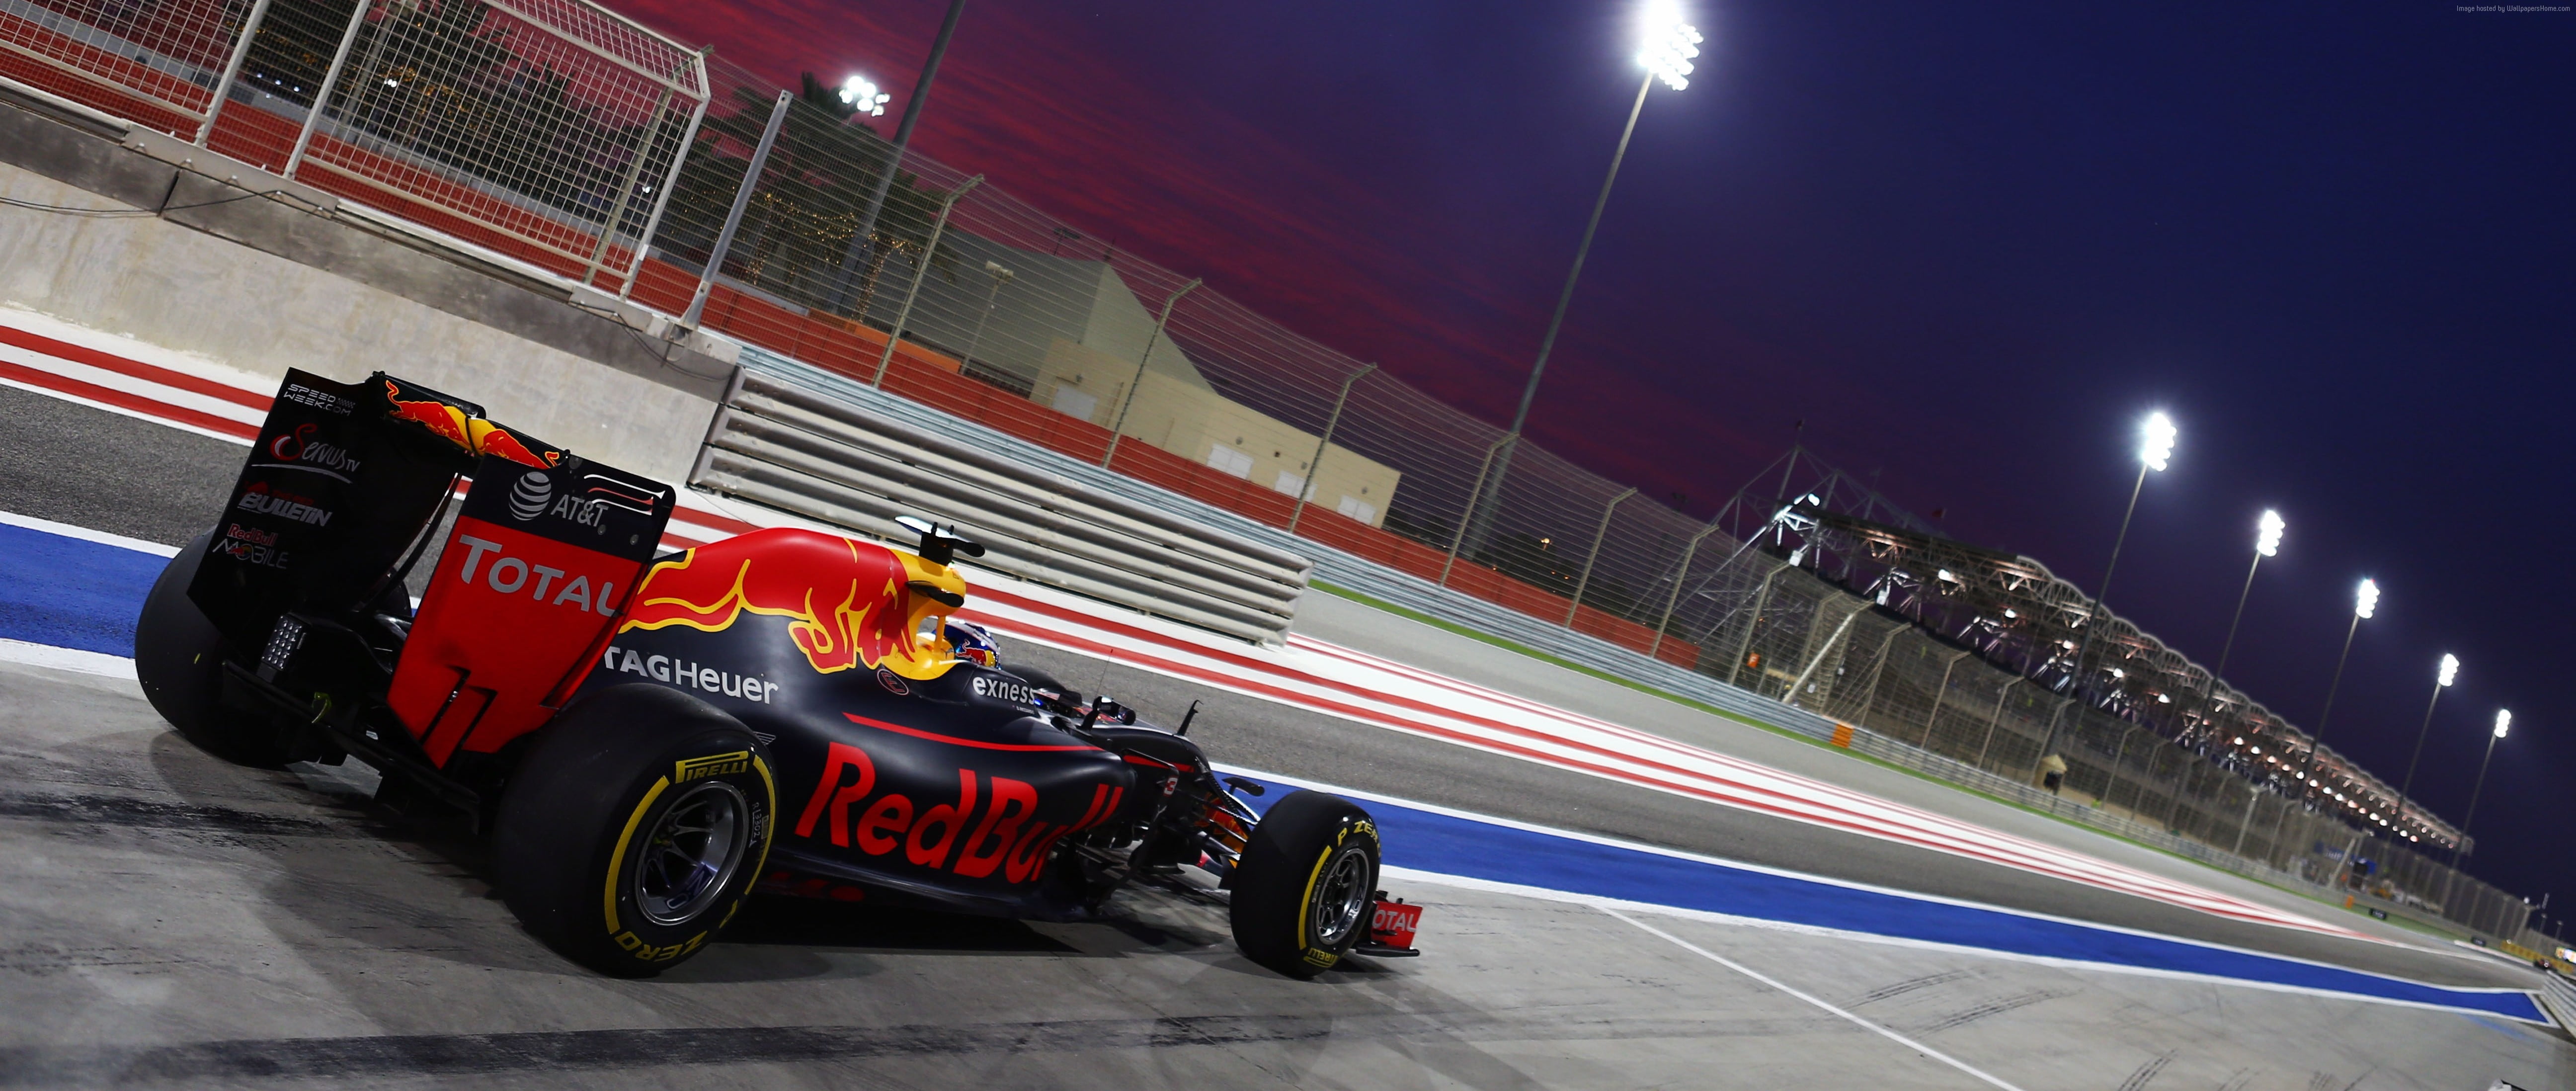 Photo Of Black And Red Total Redbull Racing Kart On Racing Arena During Night Time Hd Wallpaper Wallpaper Flare